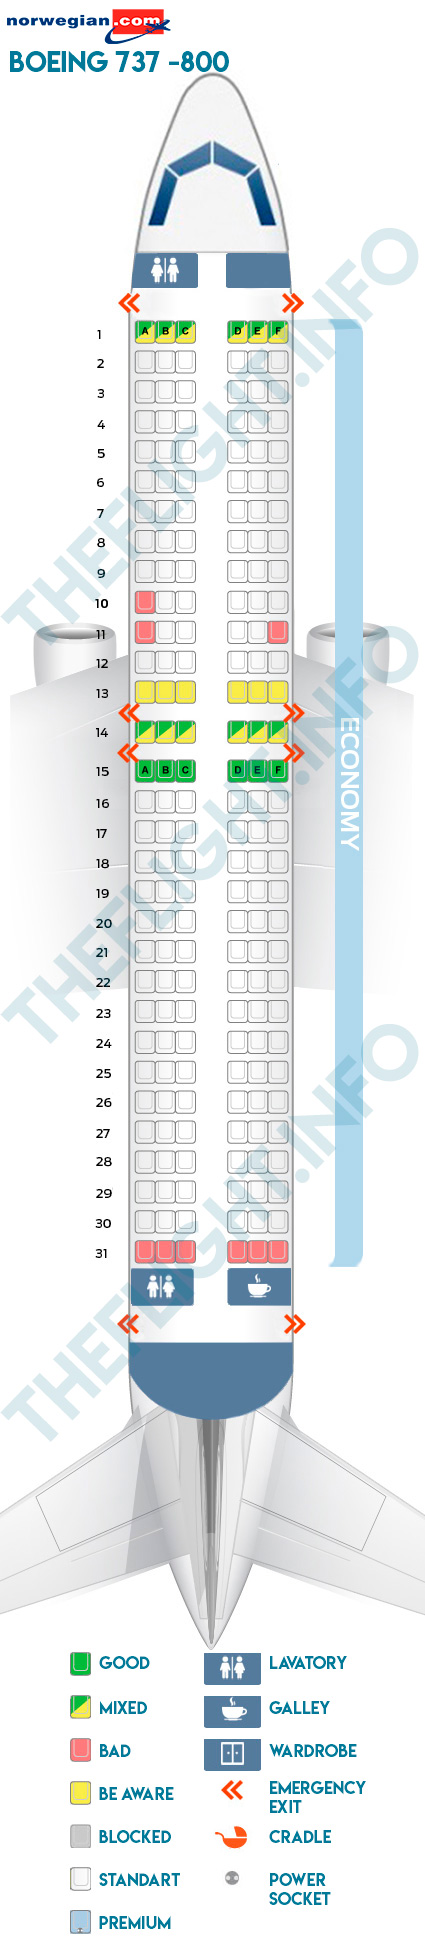 Seat Map Boeing 737 800 Norwegian Air Shuttle Best Seats In The Plane